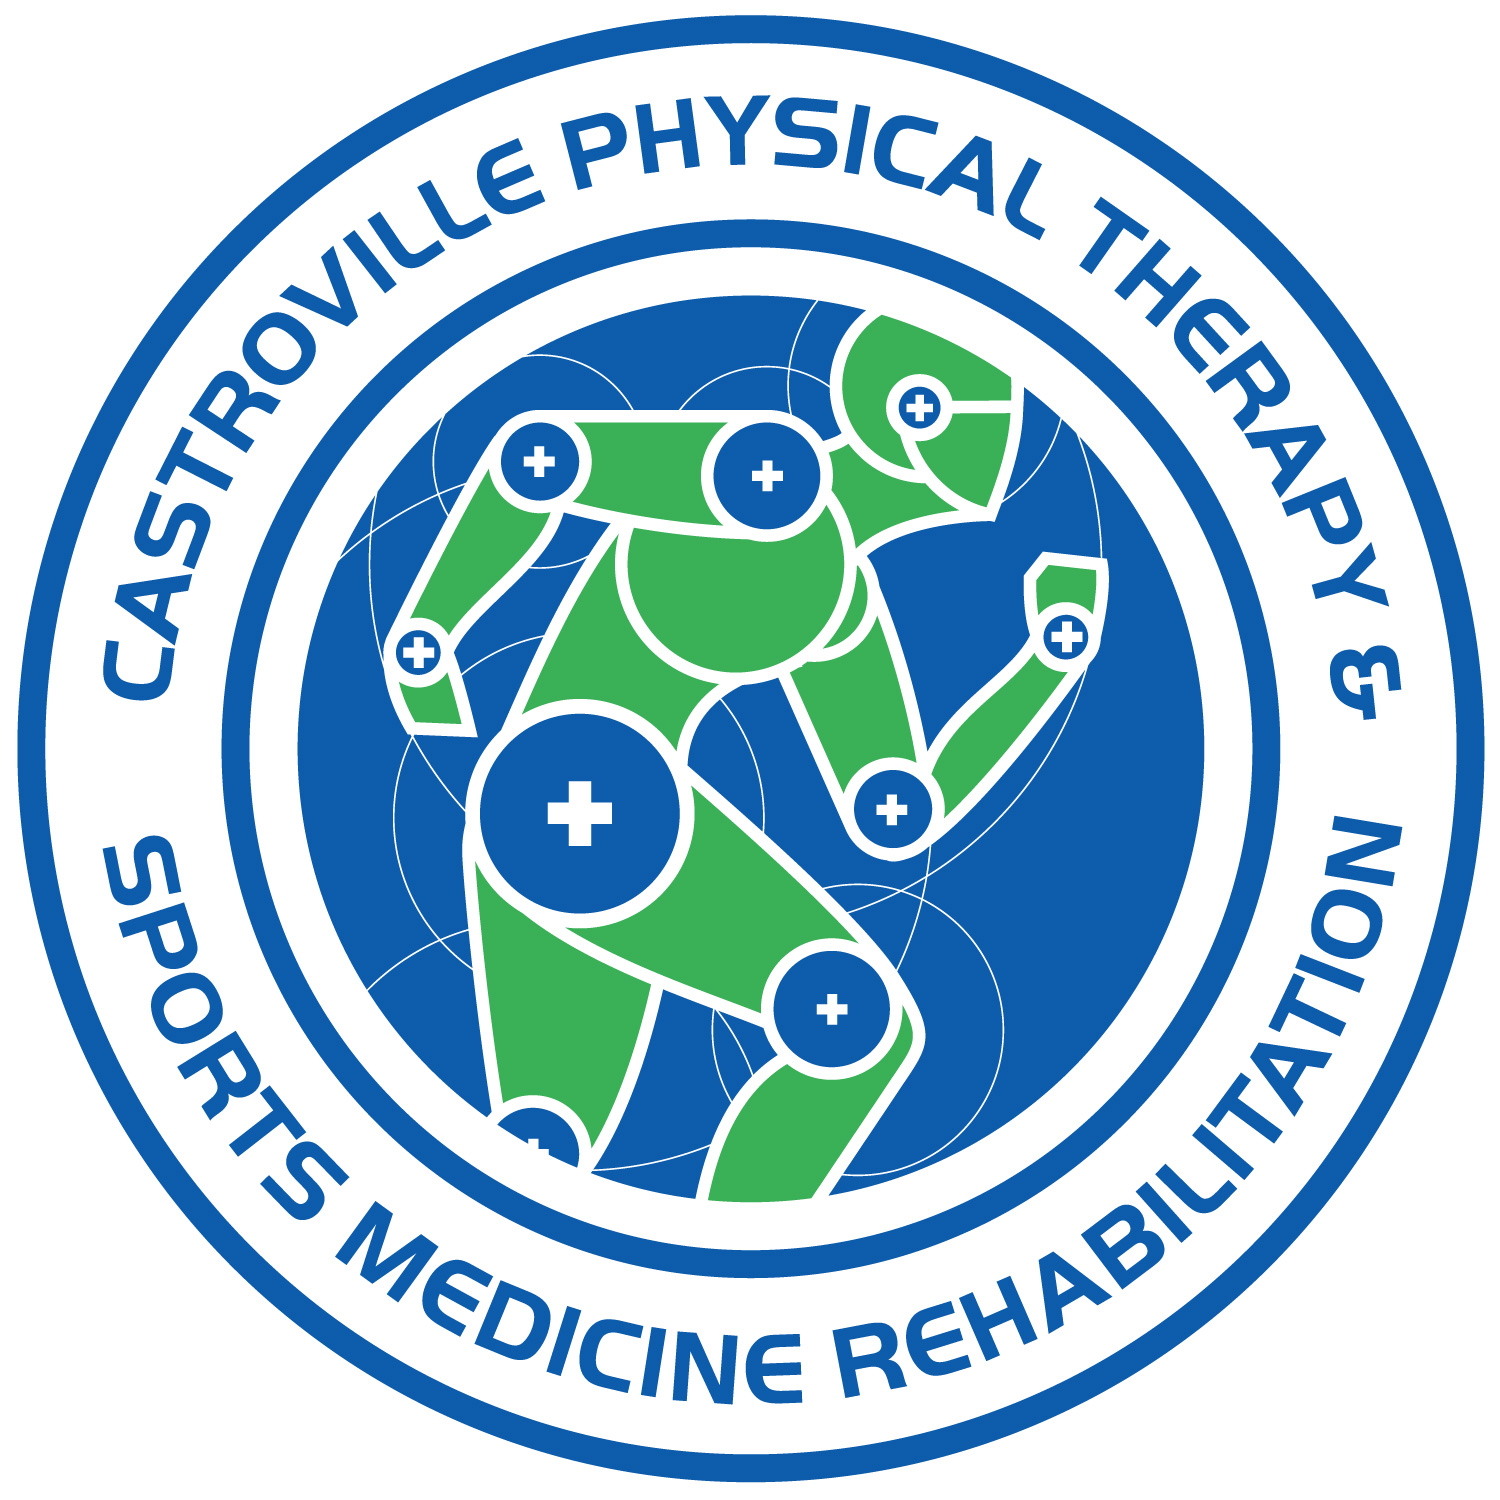 Castroville Physical Therapy & Sports Medicine Rehabilitation